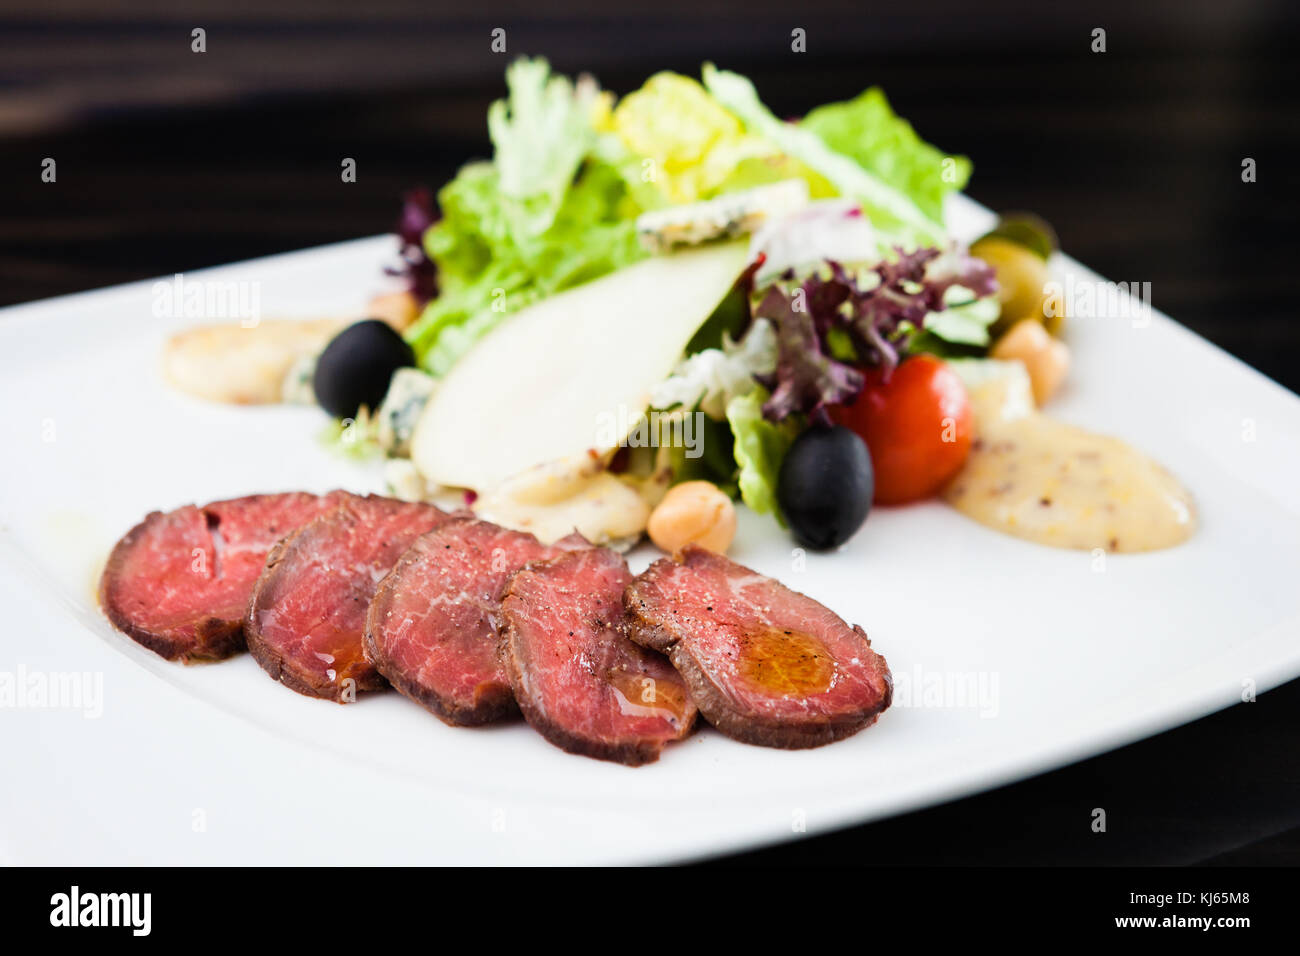 Beef fillet spiced with pear sauce and green salad Stock Photo